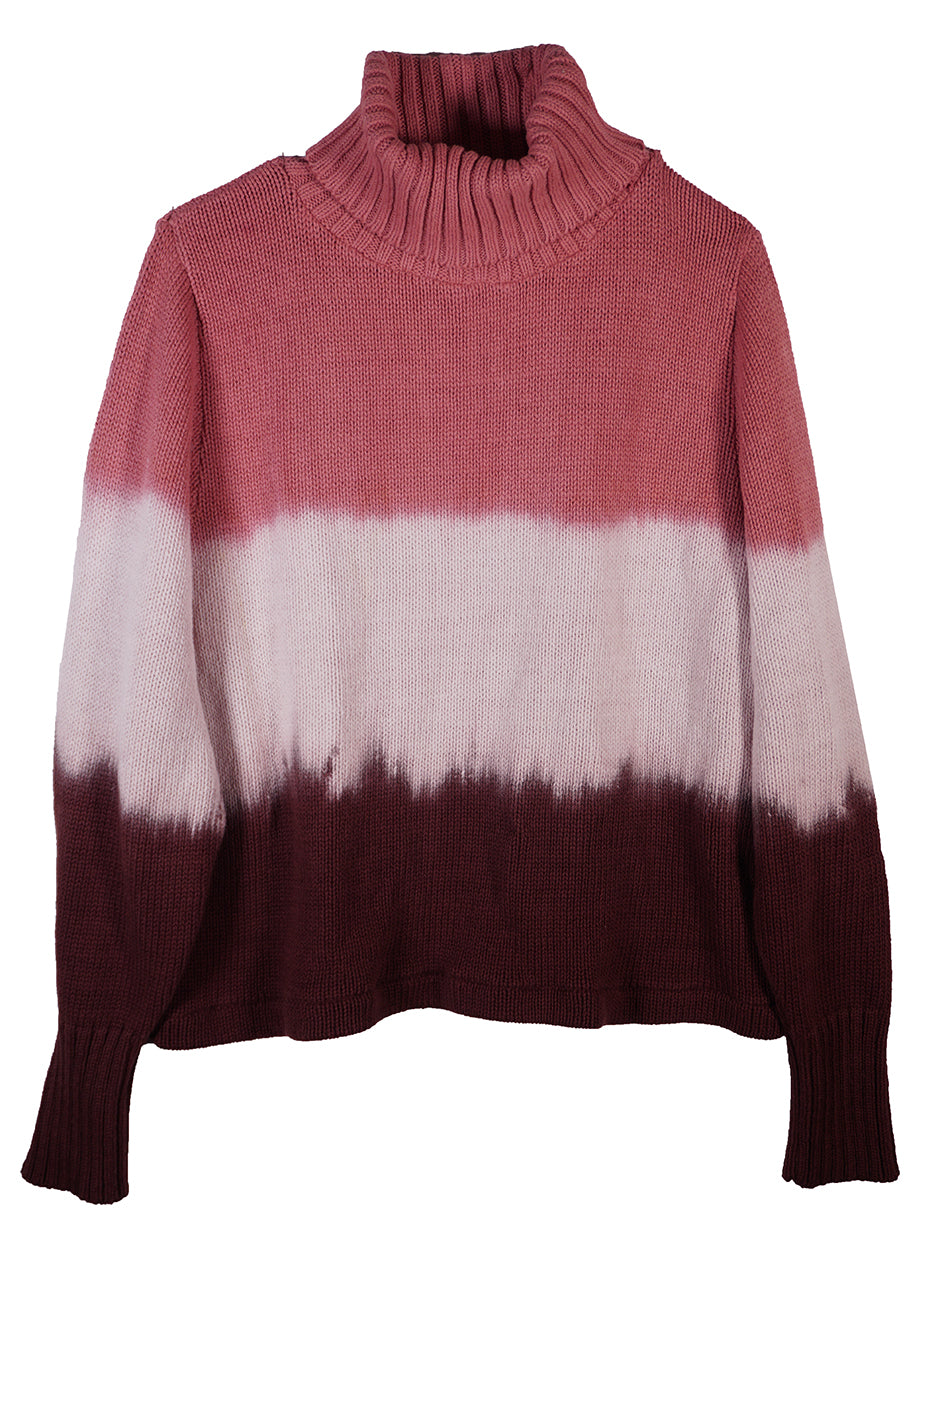 Tricolor Knit High Neck Pullover - Women - Ready-to-Wear